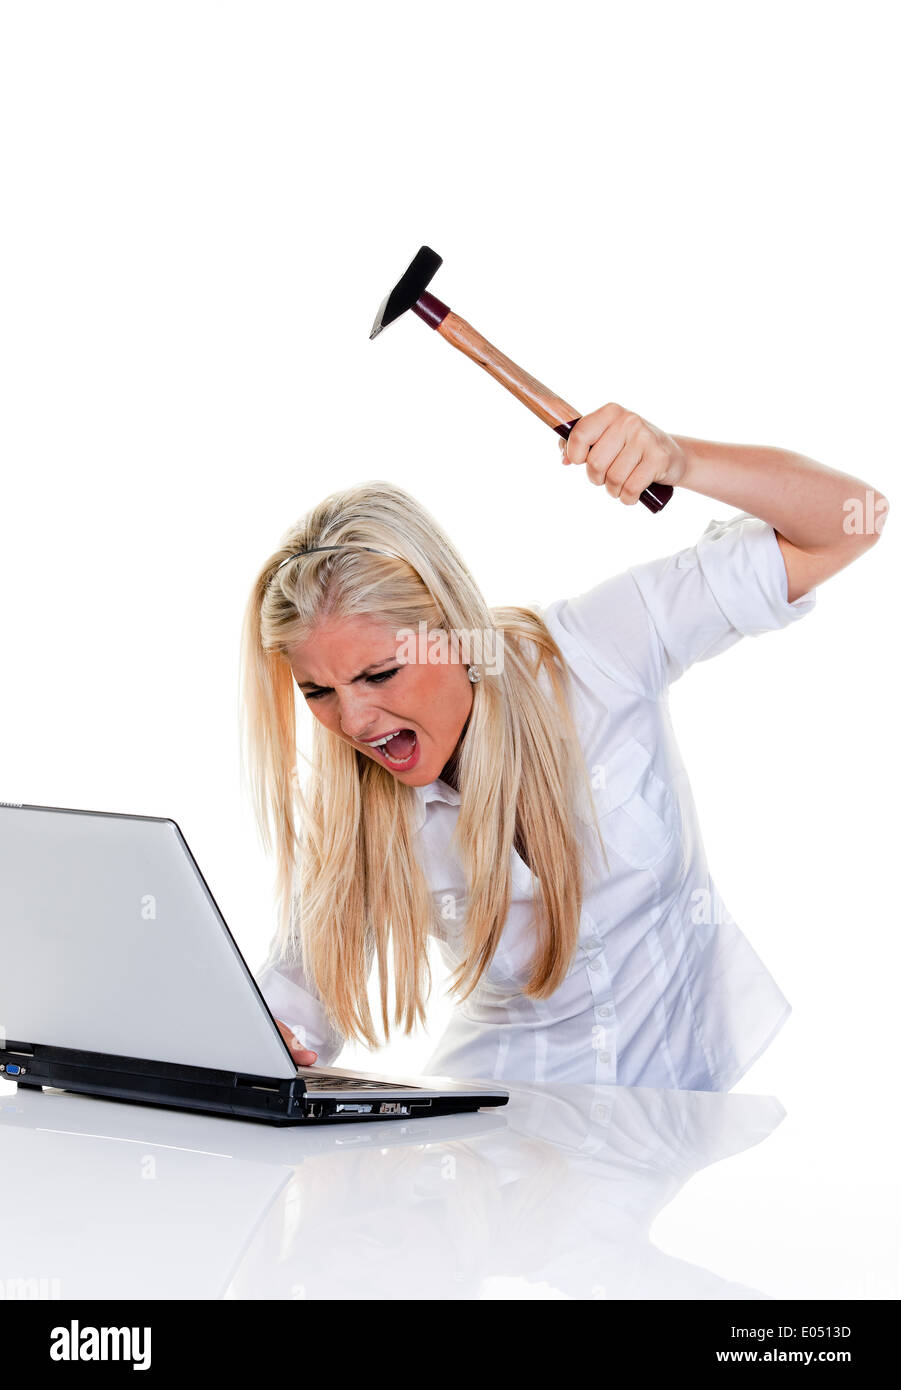 Woman with computer to problems, hammer and laptop:, Frau mit Computer Problemen, Hammer und Laptop: Stock Photo